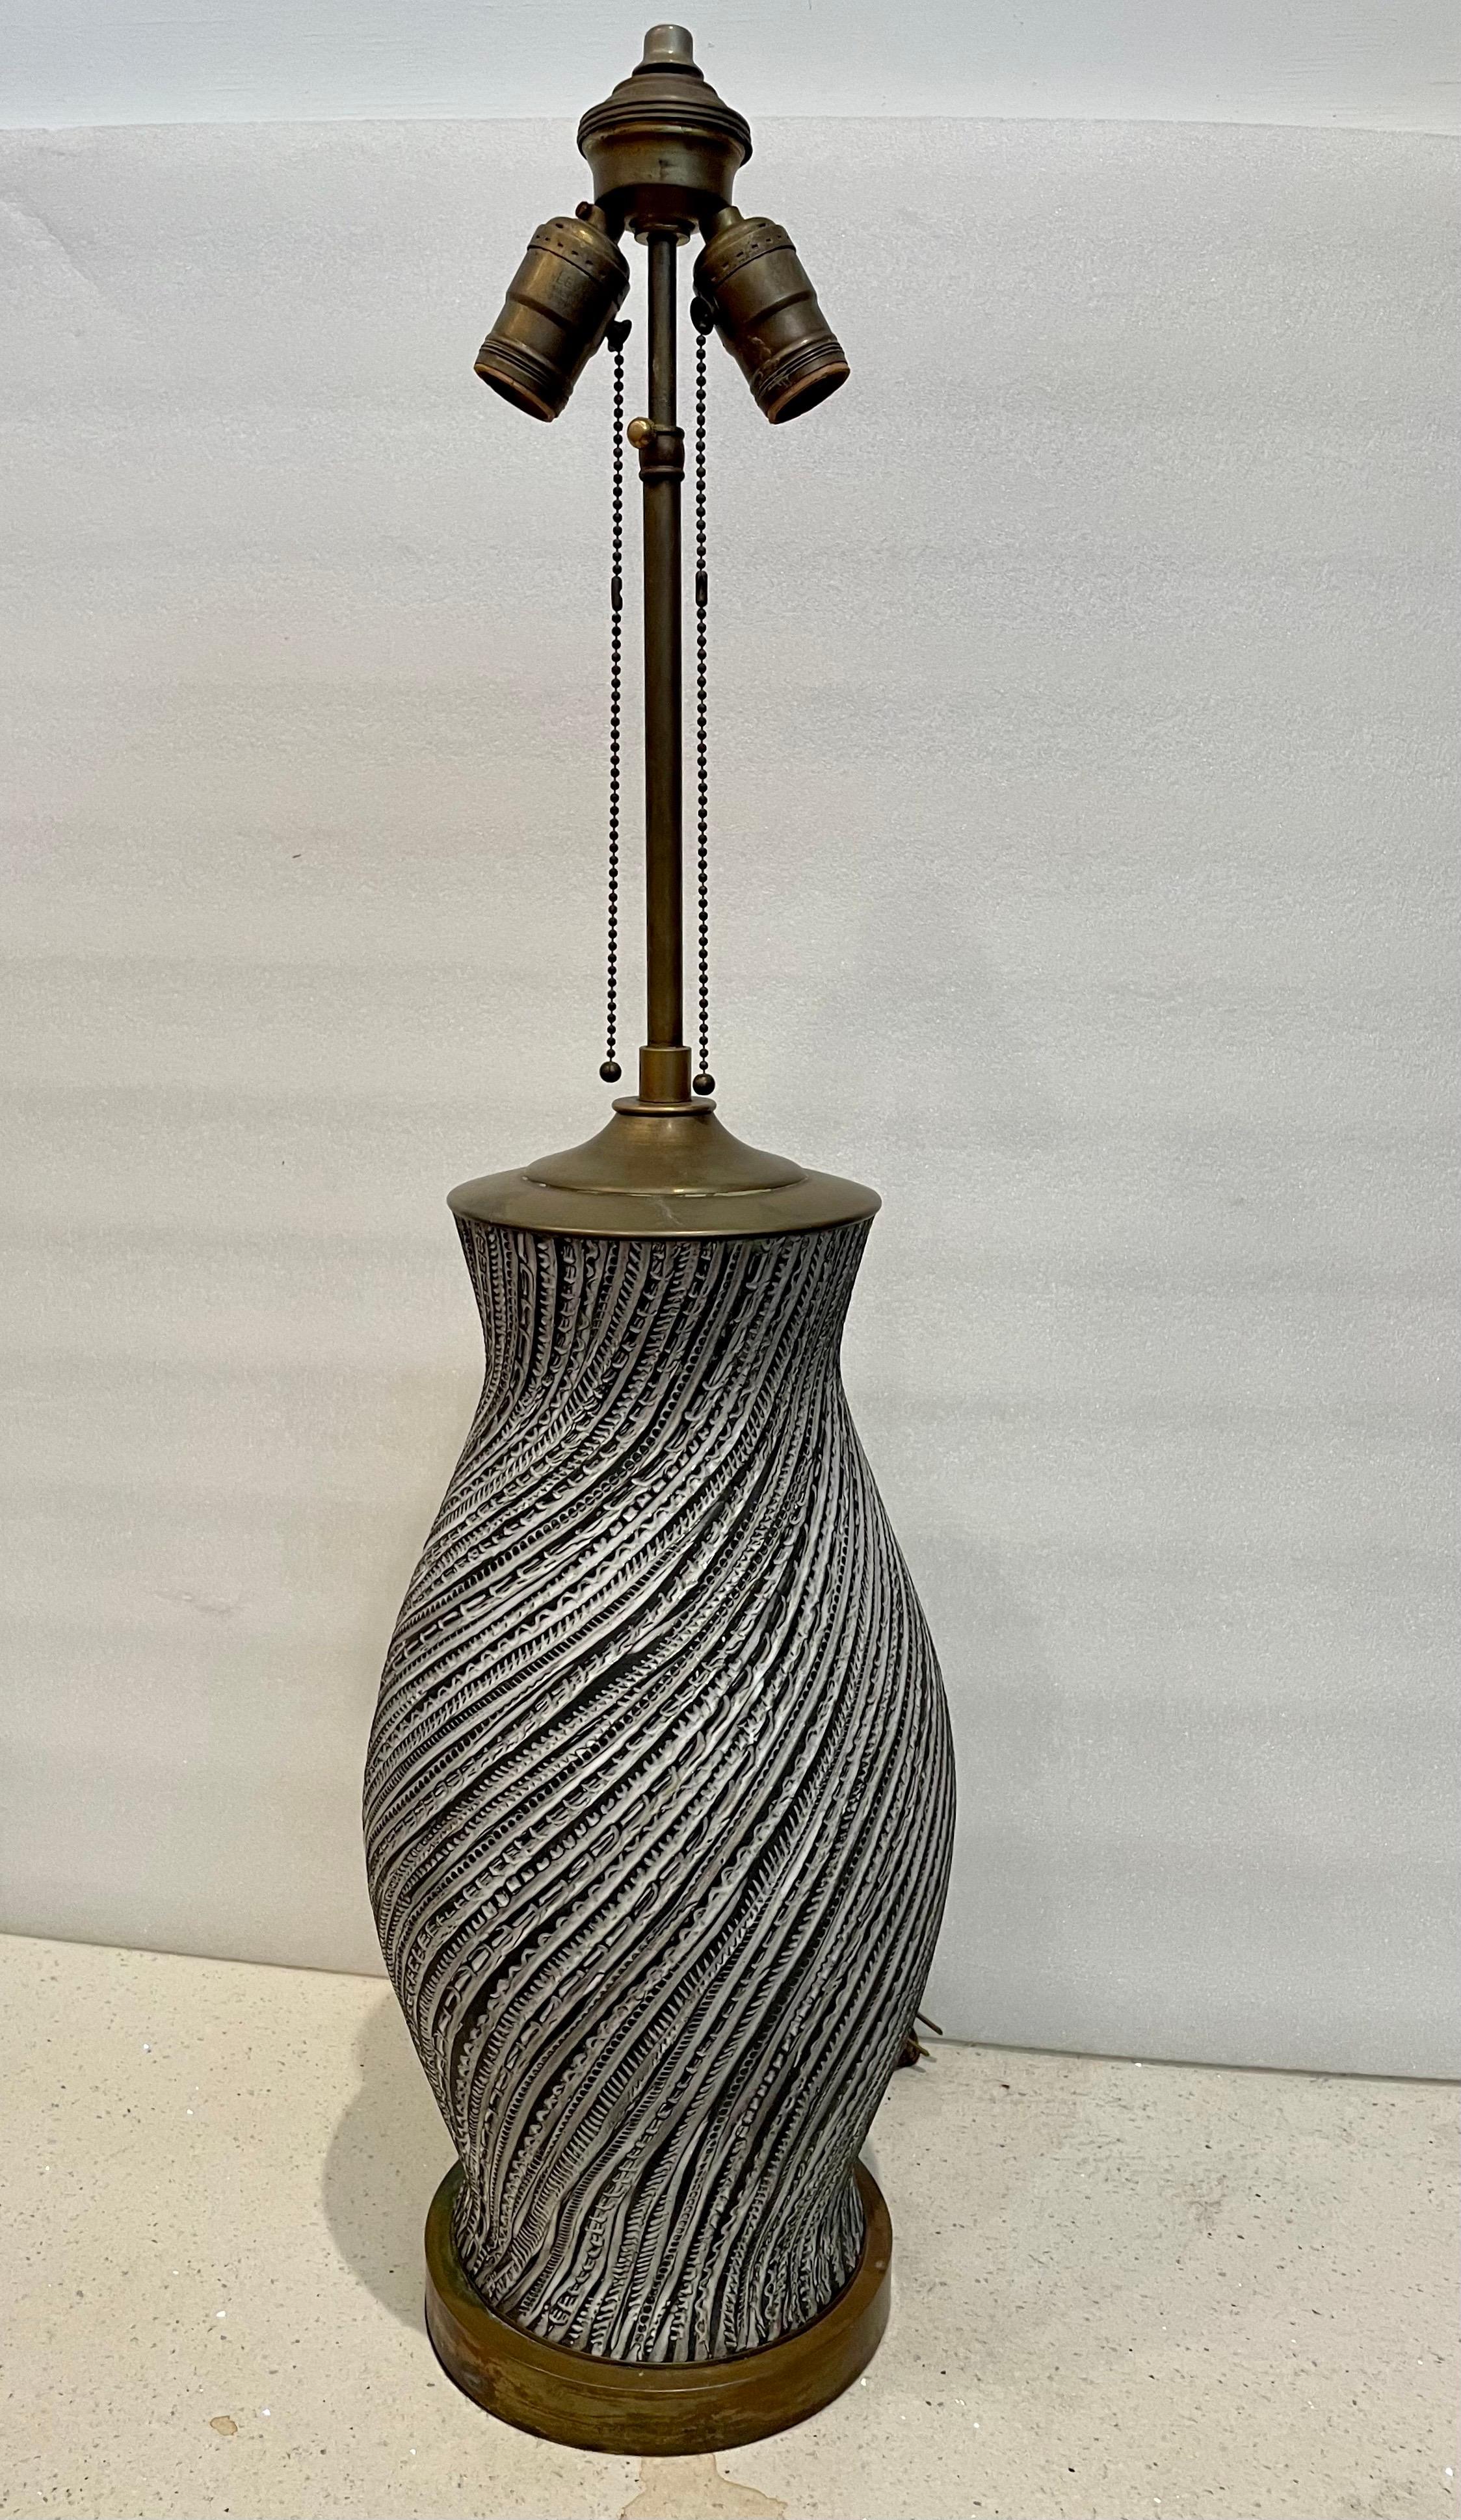 Majestic ceramic table lamp by Meister of Switzerland, in pottery with patinated brass fittings double socket and telescopic finial, freshly rewired with a twisted cloth cord. lamp shade not included.